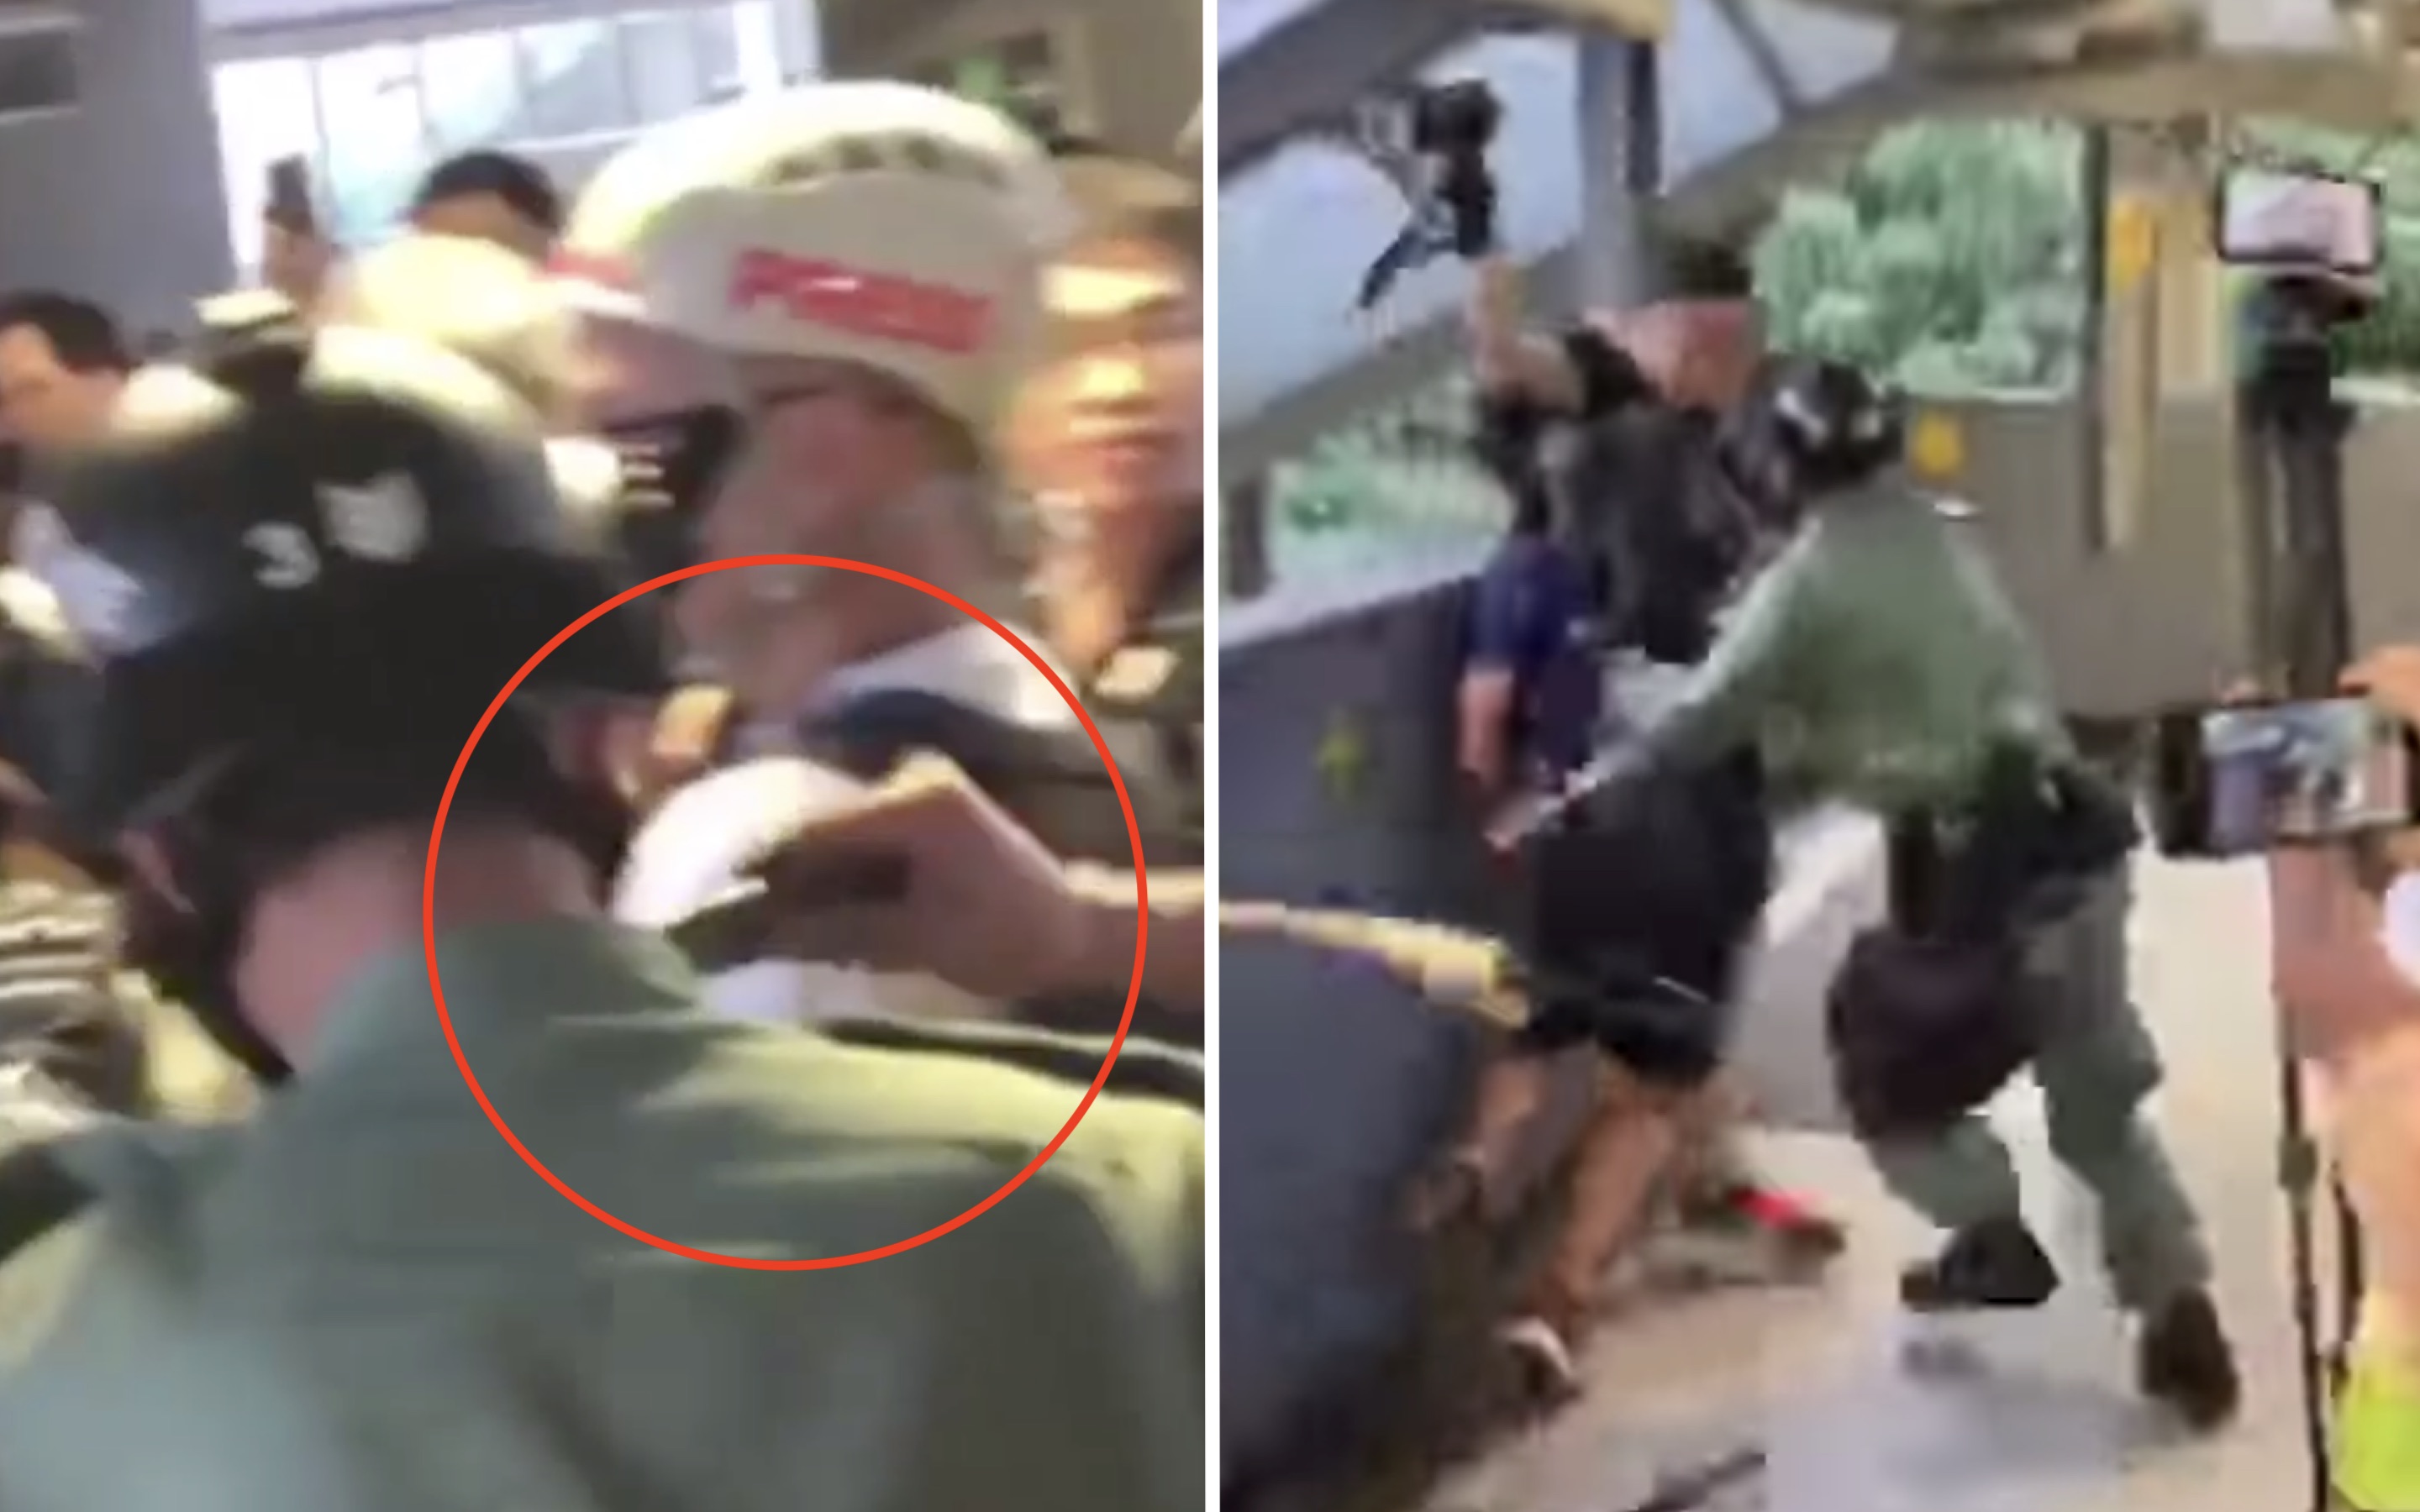 The moment someone uses ‘a sharp object’ to cut the neck of a police officer outside Kwun Tong MTR station. Screengrab via Facebook video/Ming Pao and YouTube.